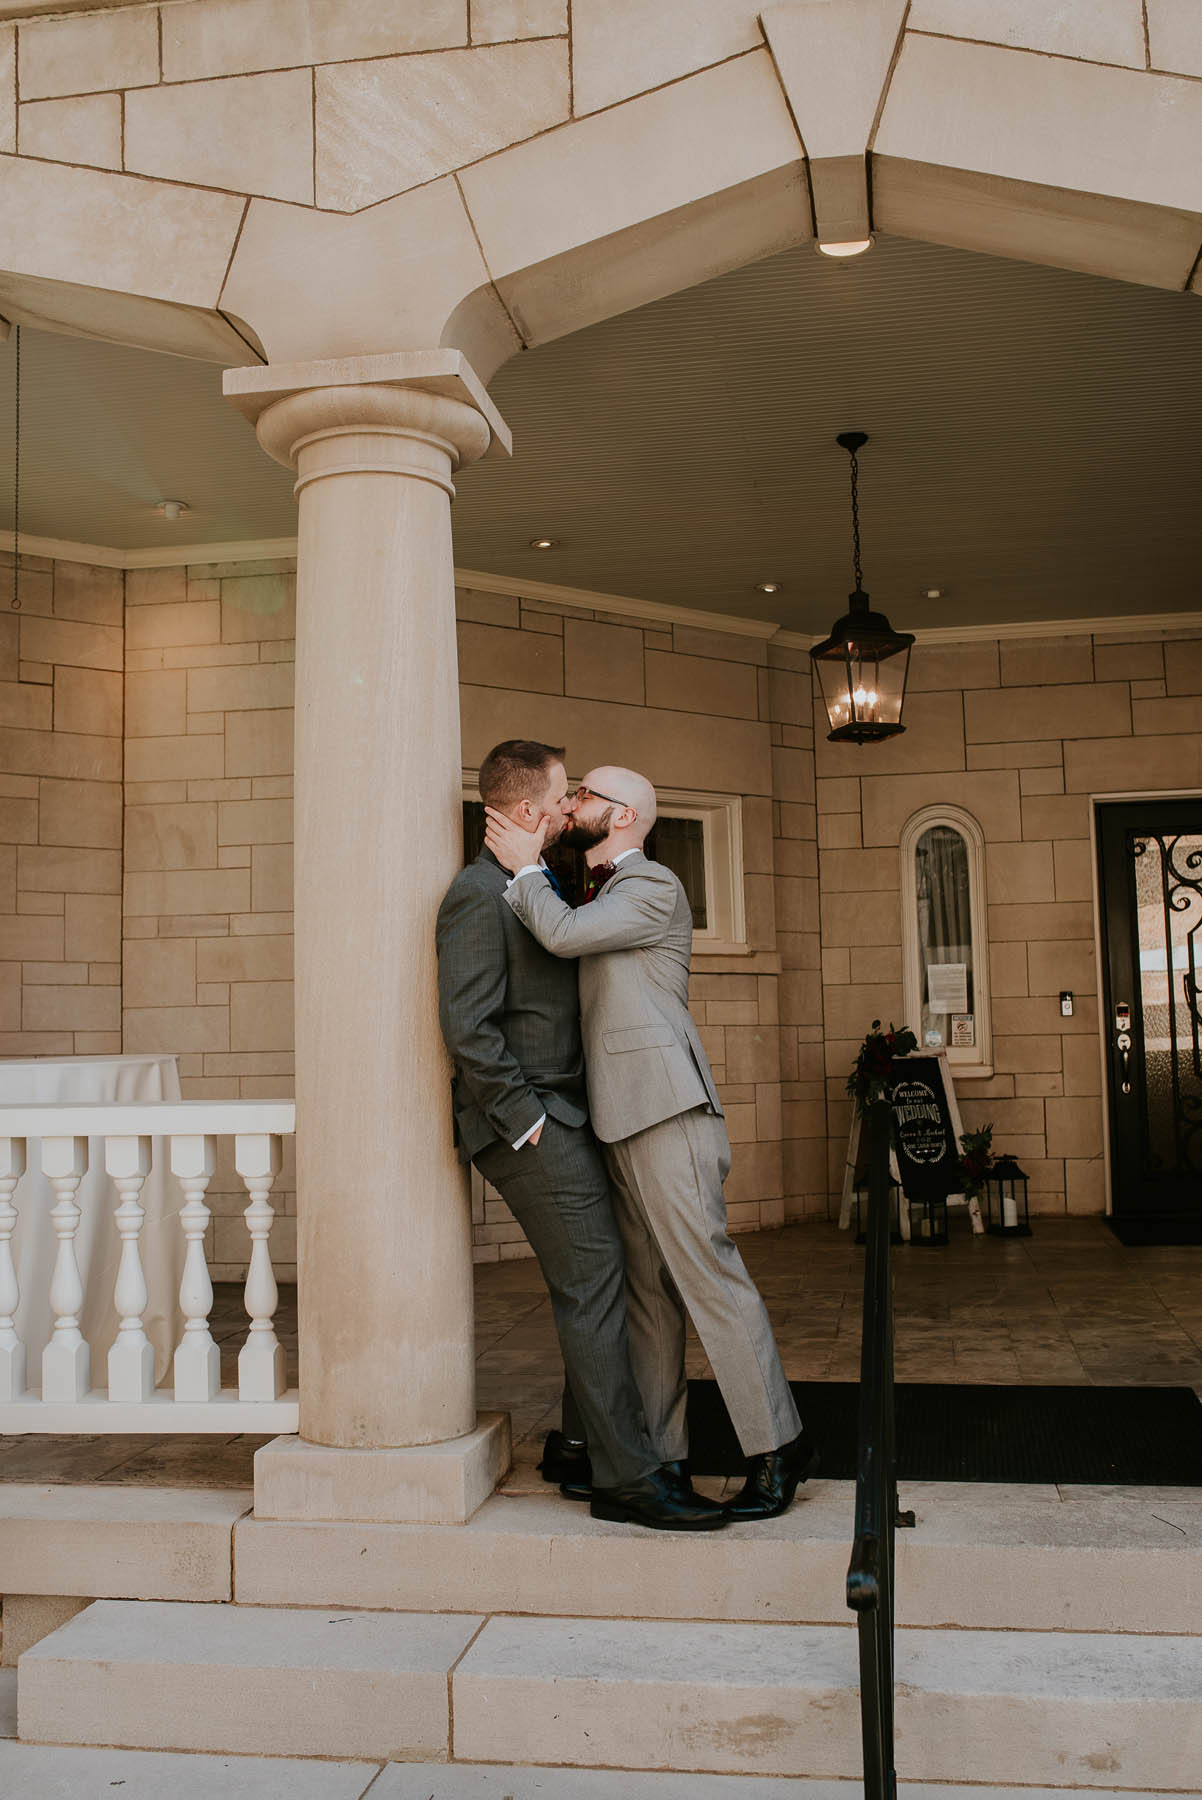 The newlyweds share a kiss outside the venue, with the masonry of the historic manor in the background.